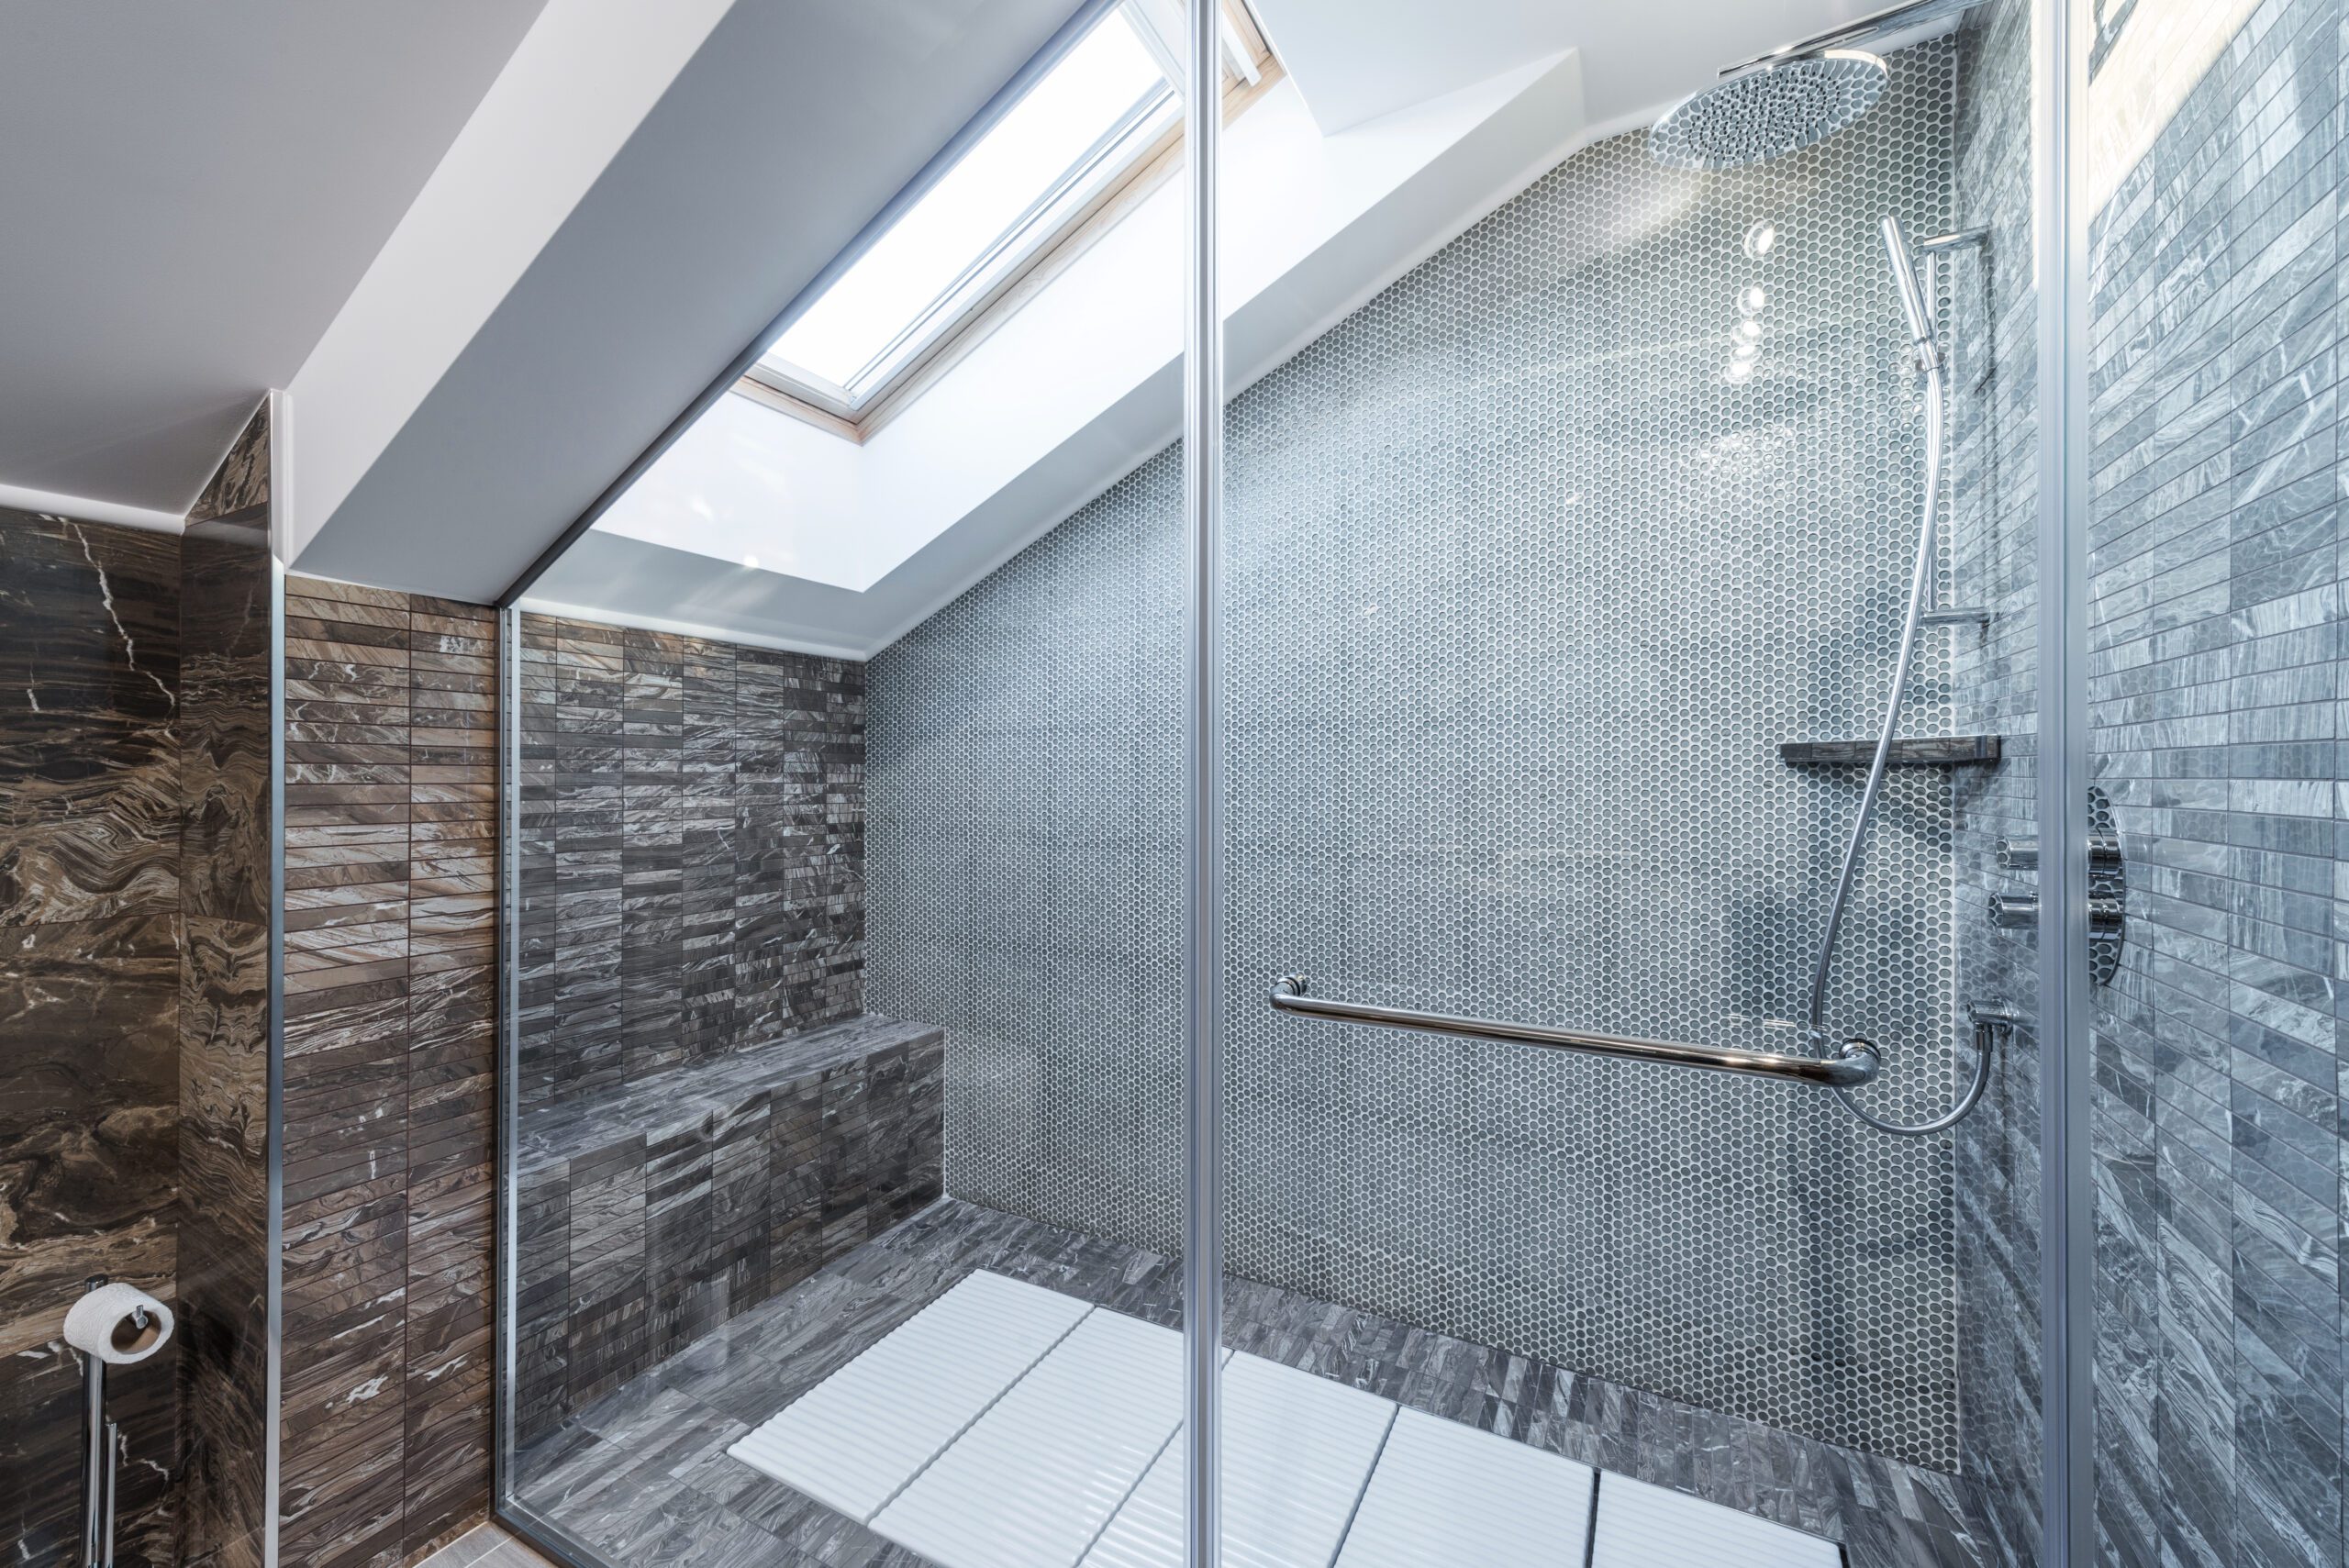 Shower door geometric shape with skylight and tile